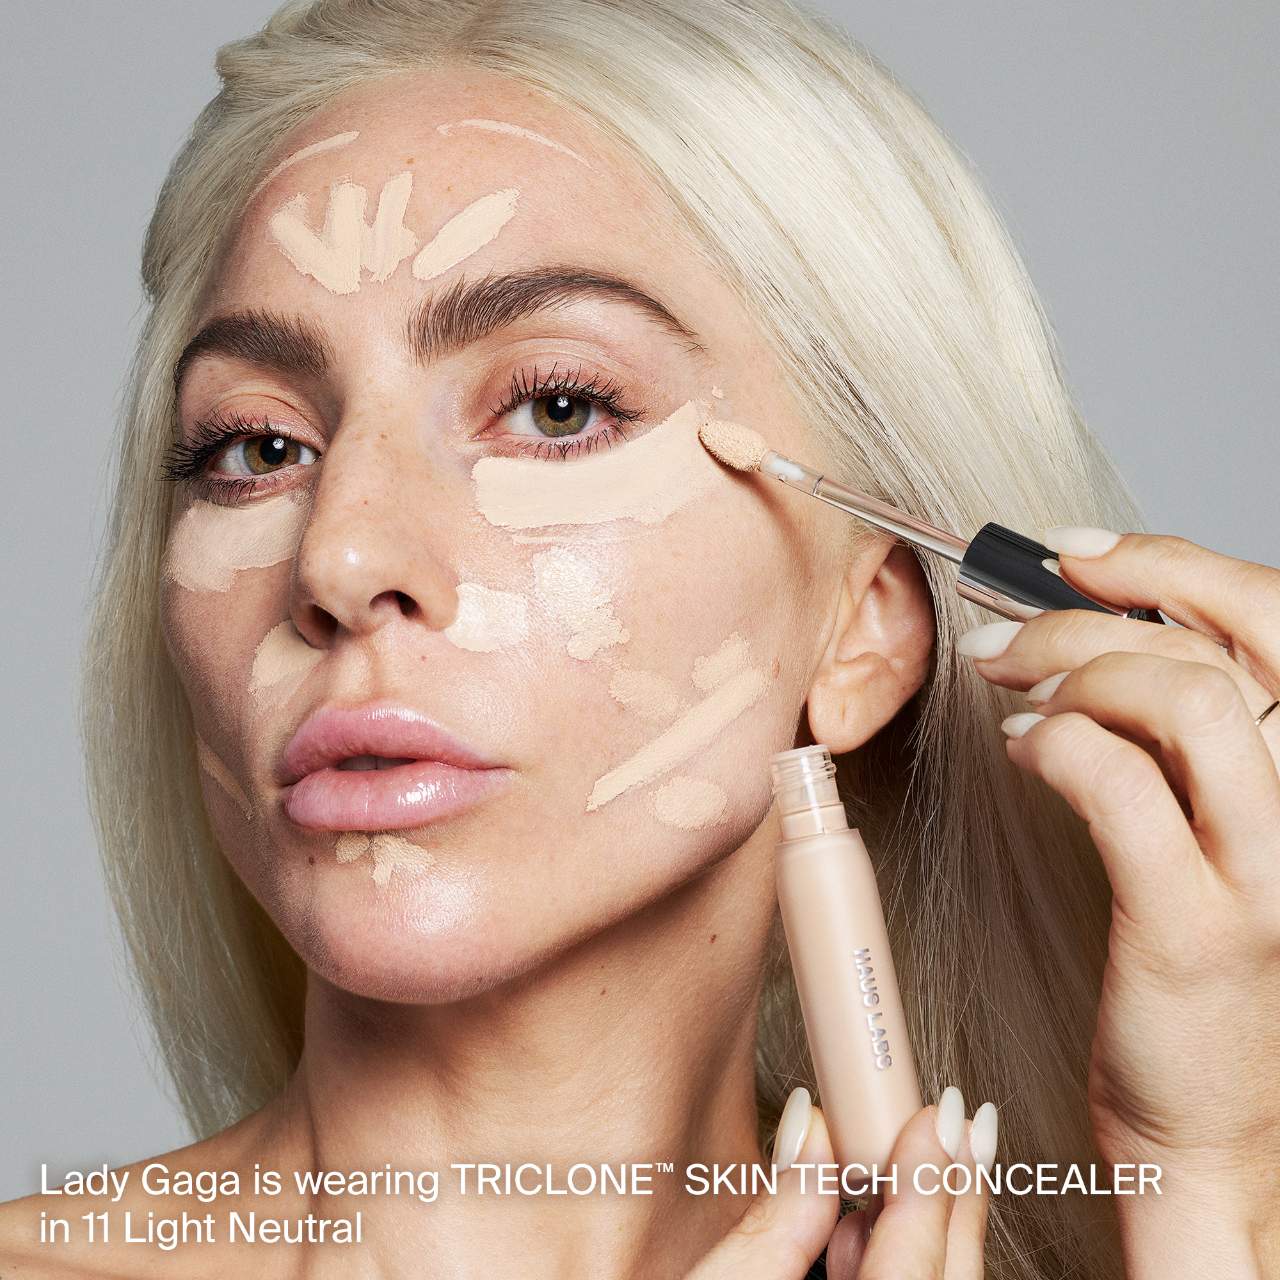 HAUS LABS BY LADY GAGA | Triclone Skin Tech Hydrating + De-puffing Concealer with Fermented Arnica | 24 Light Medium Neutral